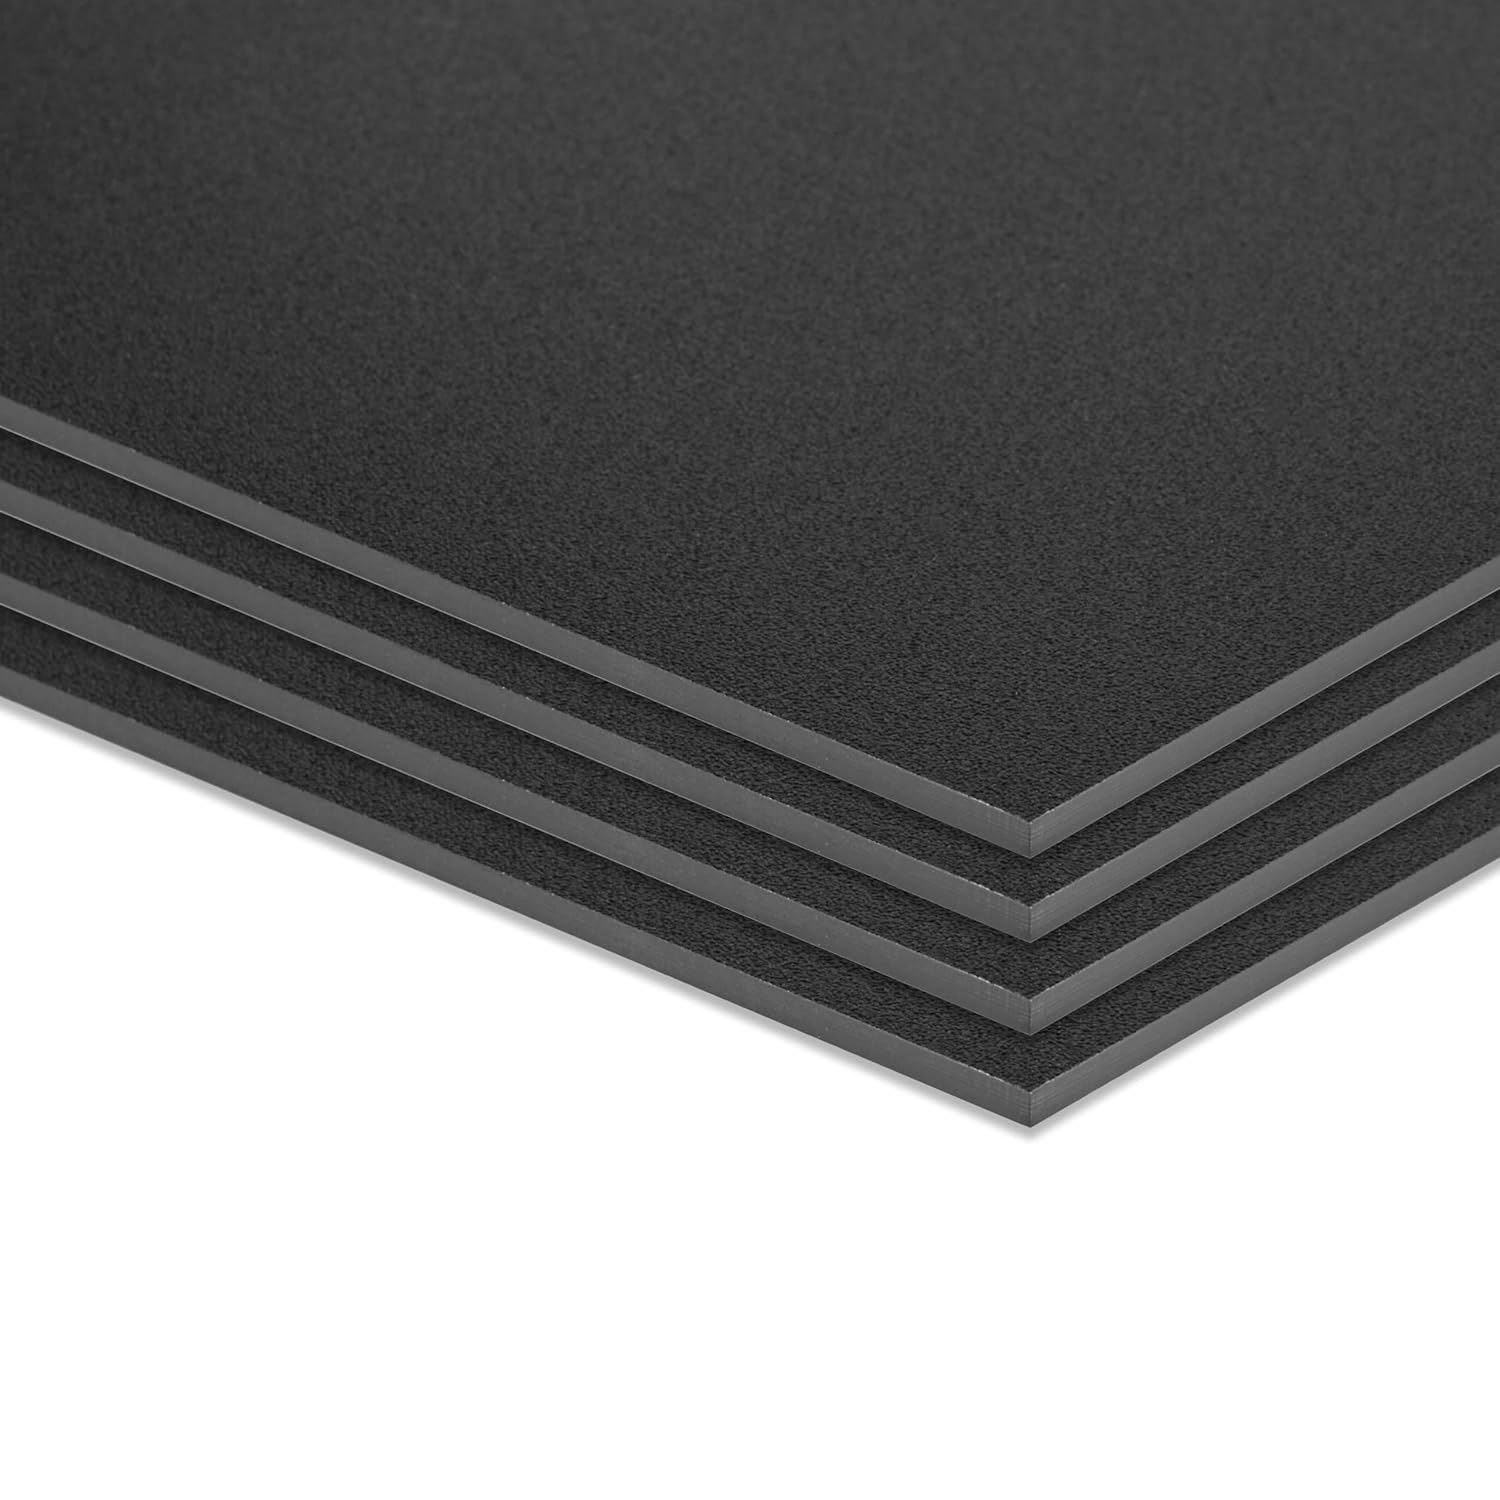 Paidu ABS Plastic Sheet 18" x 24" x 0.060" Thick Pack of 4 Black Moldable Thermoplastic Panel 1/16" Thick 1.5mm for Crafts DIY Projects - Textured & Smooth Finish